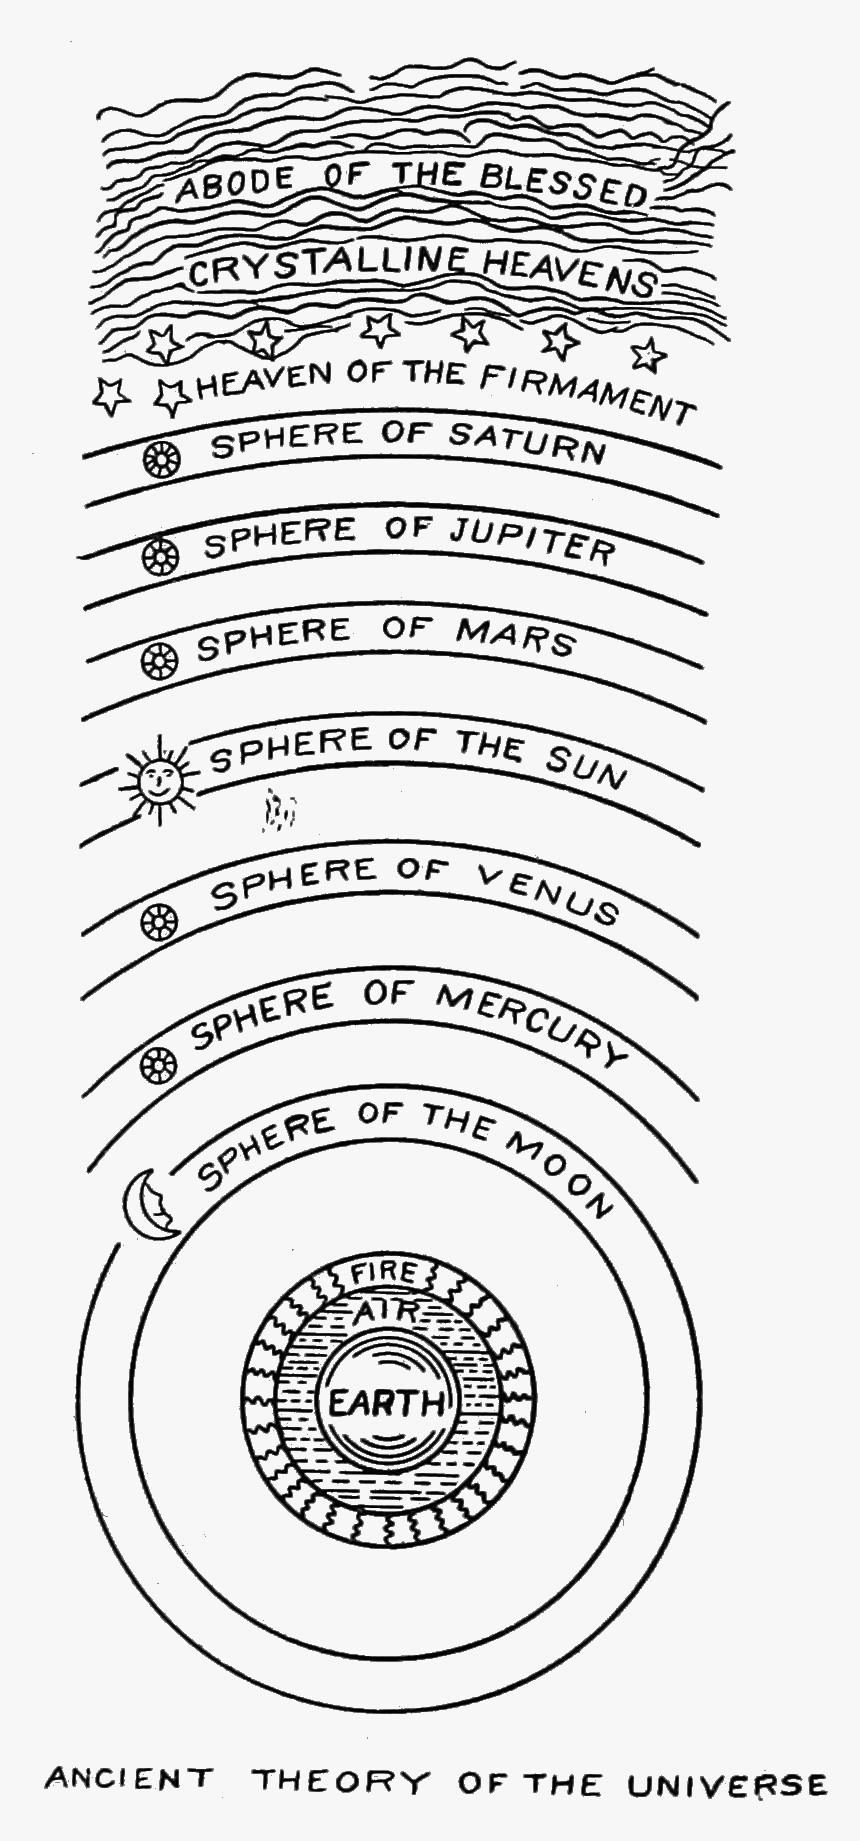 Psm V75 D475 Ancient Theory Of The Universe - Geocentric Model With Heaven, HD Png Download, Free Download